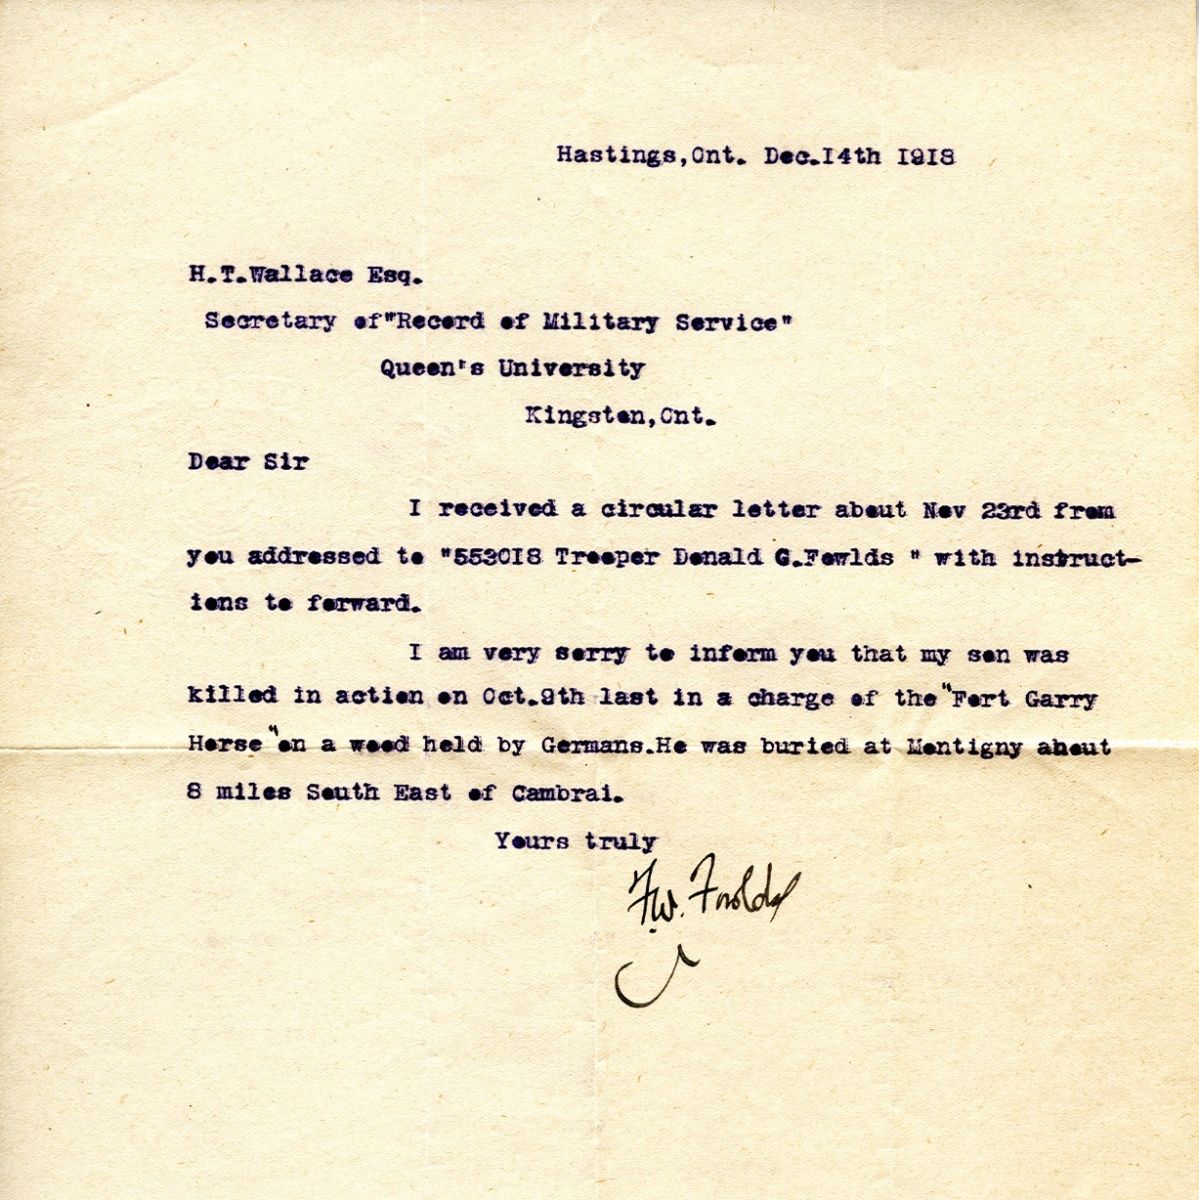 Letter from F.W. Fowlds to H.T. Wallace Esq. 14th December 1918